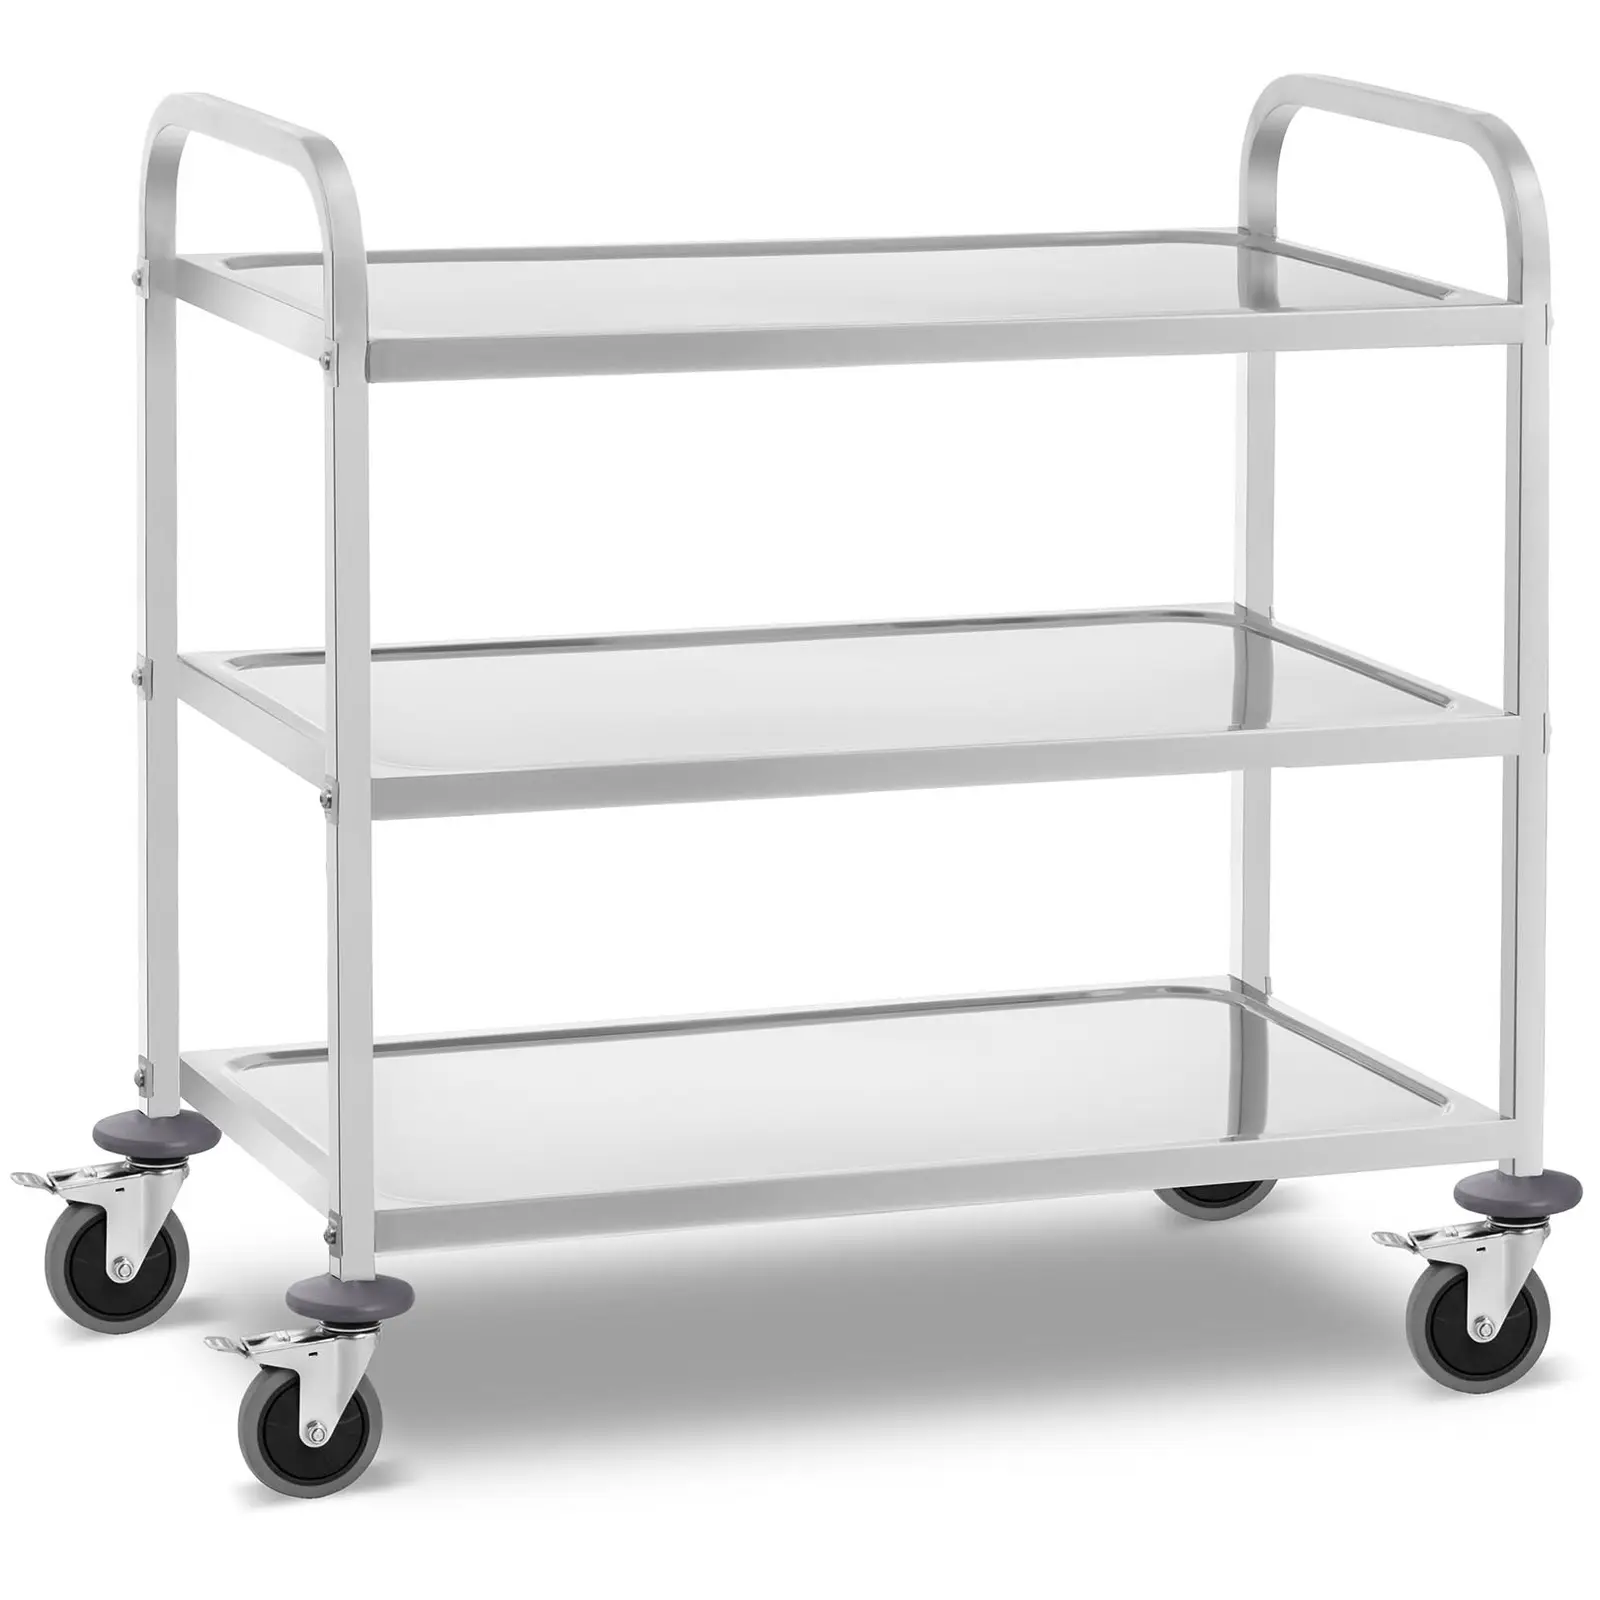 Factory second Serving Trolley - 3 shelves - up to 355 kg